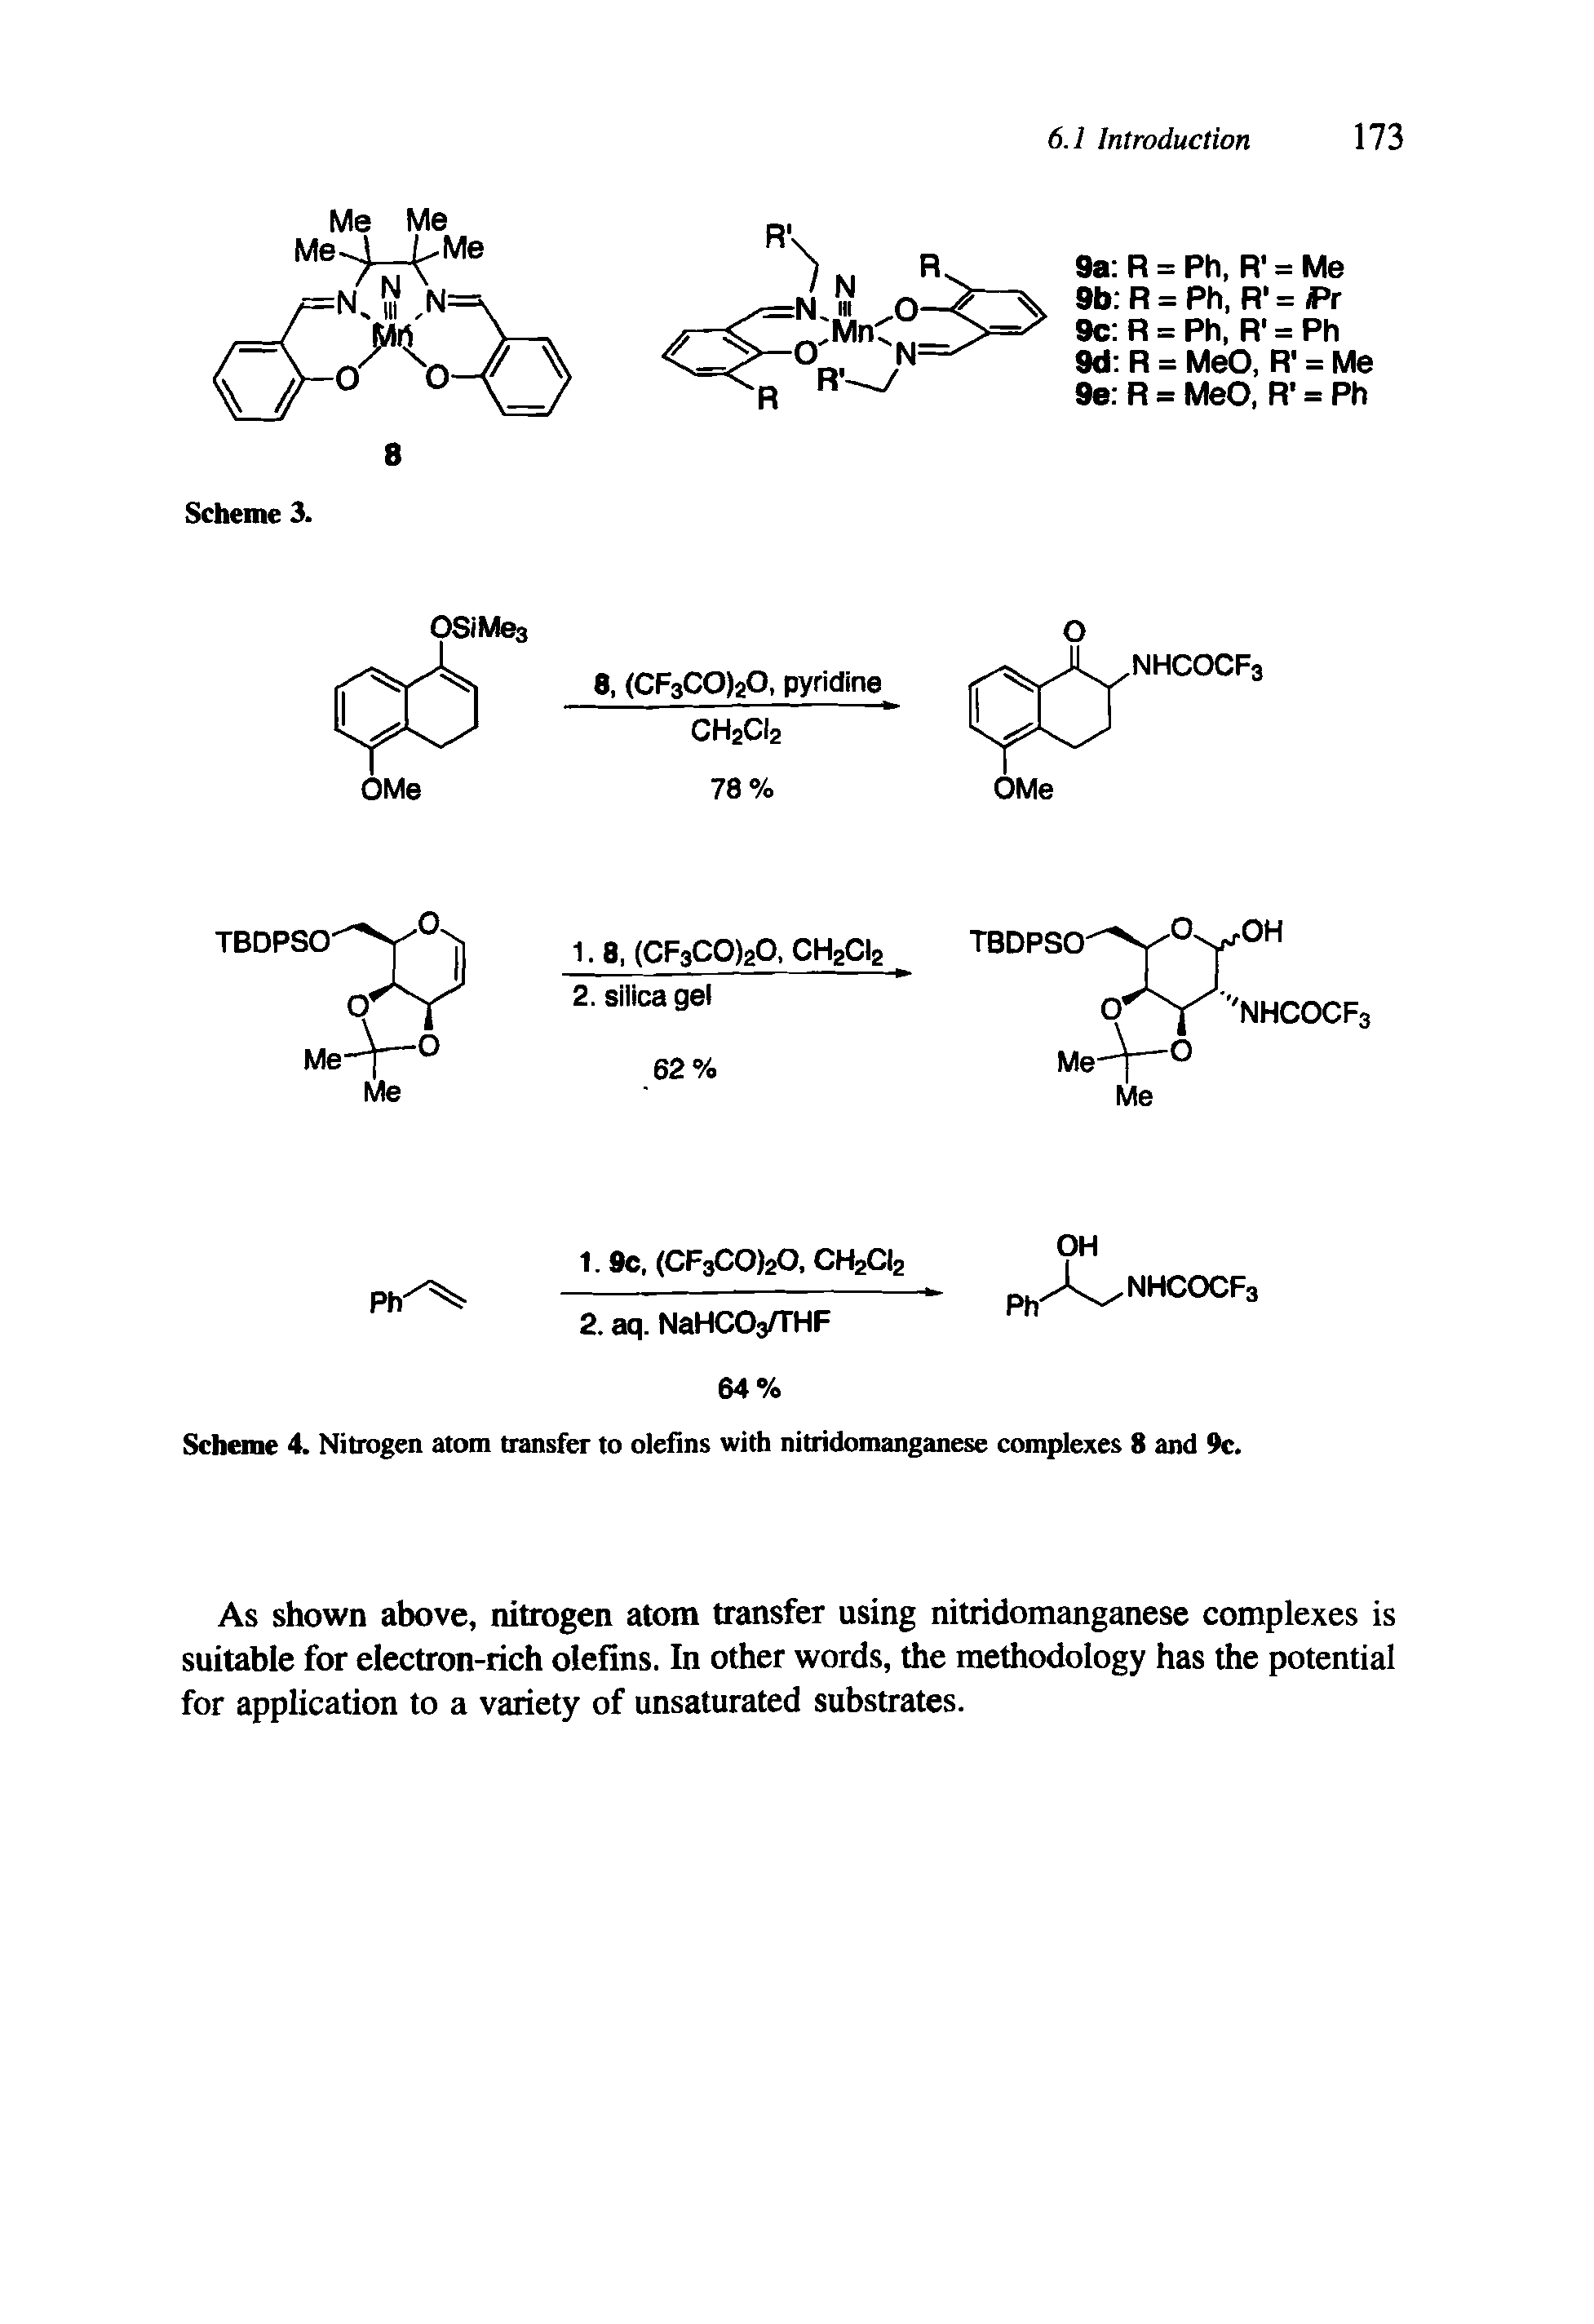 Scheme 4. Nitrogen atom transfer to olefins with nitridomanganese complexes 8 and 9c.